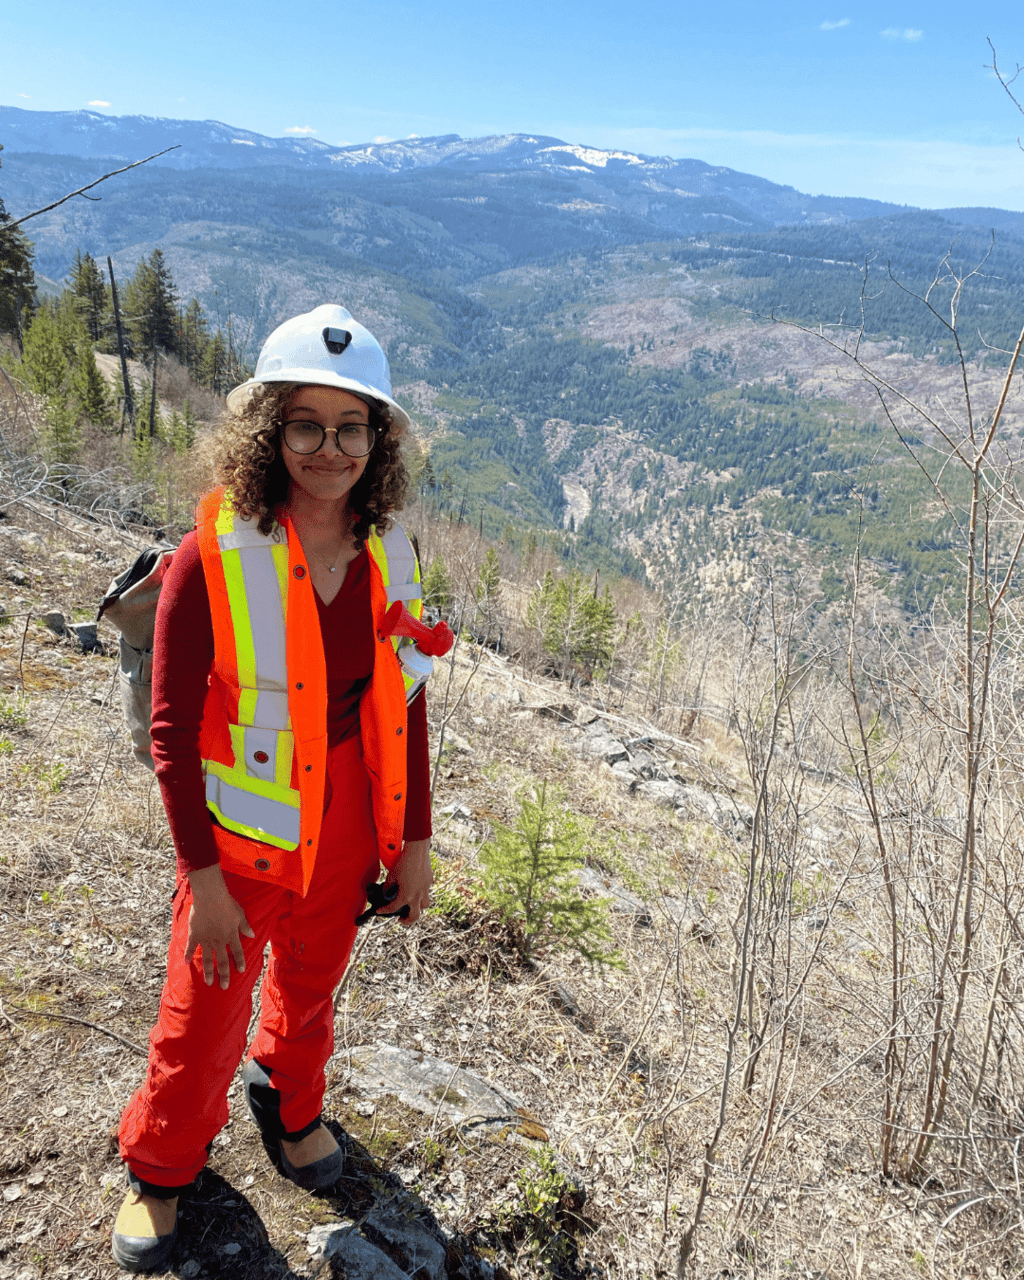 Olla is standing on a hillside with mountains in the background. She is wearing a white hard hat and an orange safety vest and pants. 